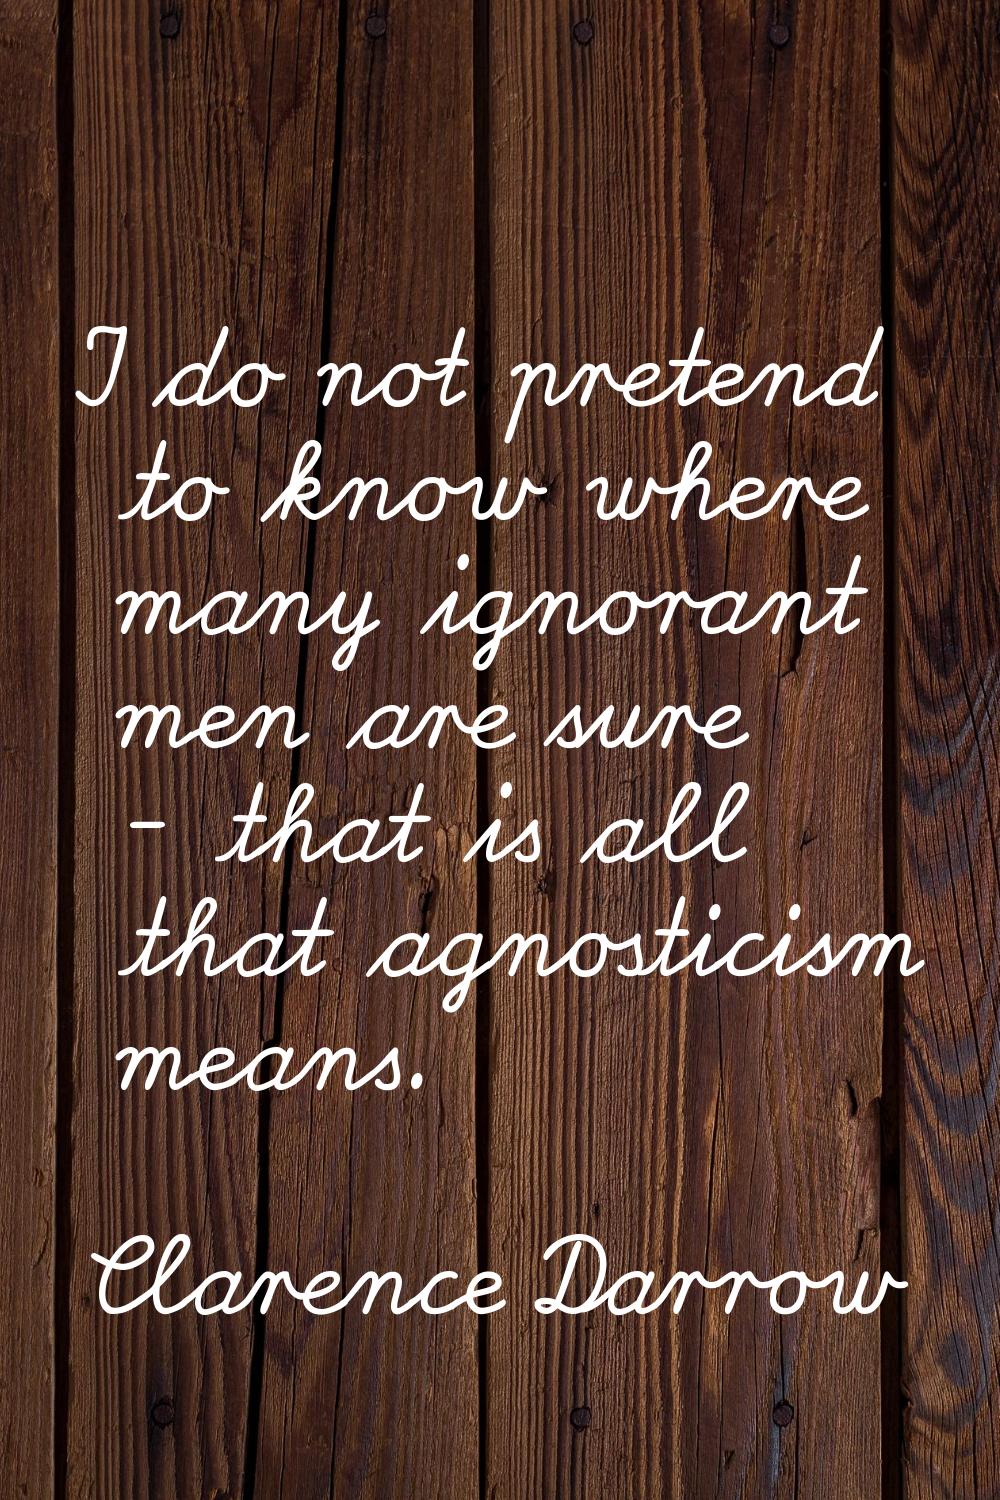 I do not pretend to know where many ignorant men are sure - that is all that agnosticism means.